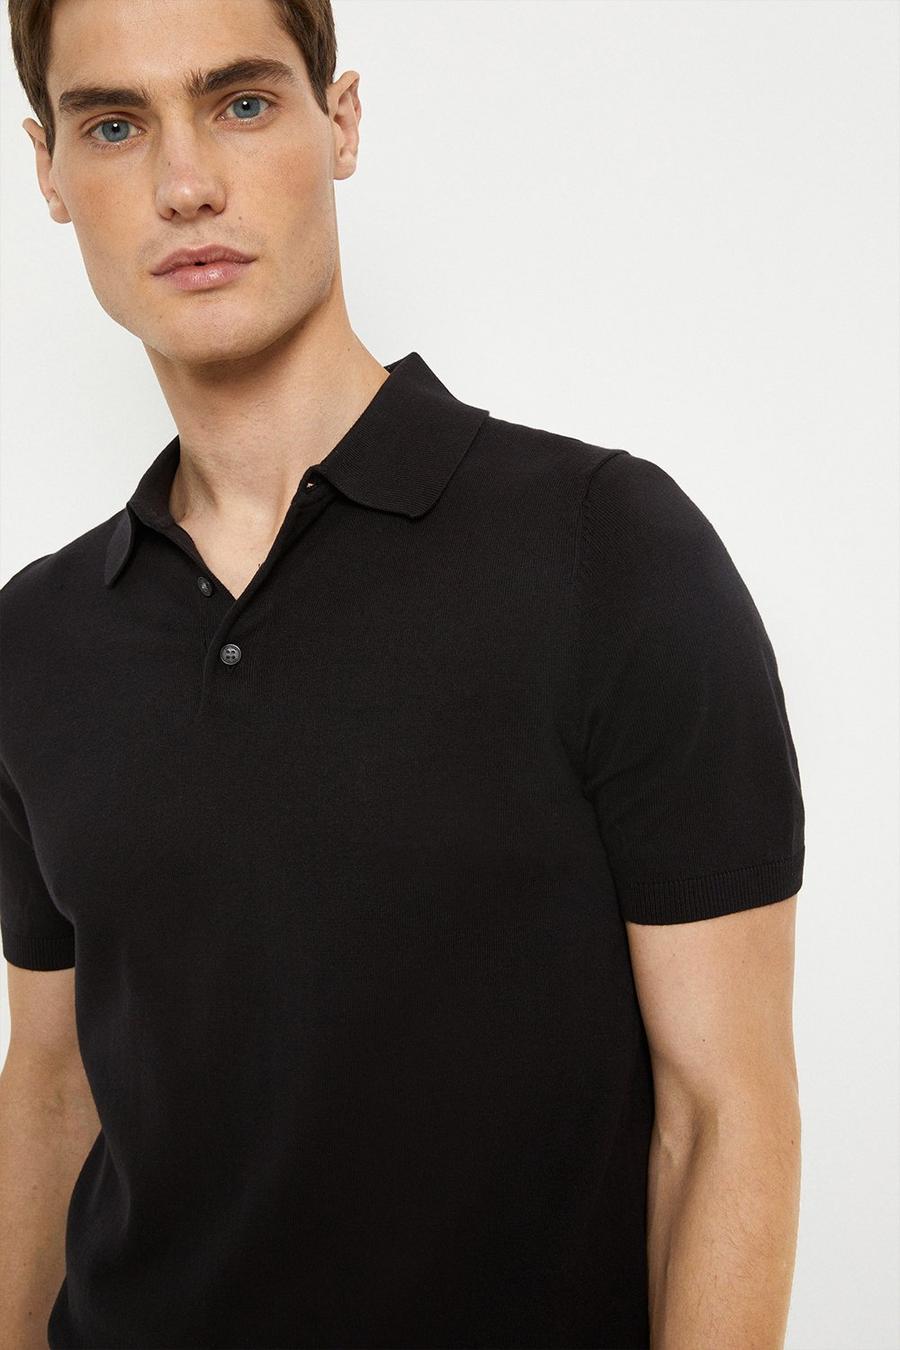 Slim Fit Black Knitted Polo